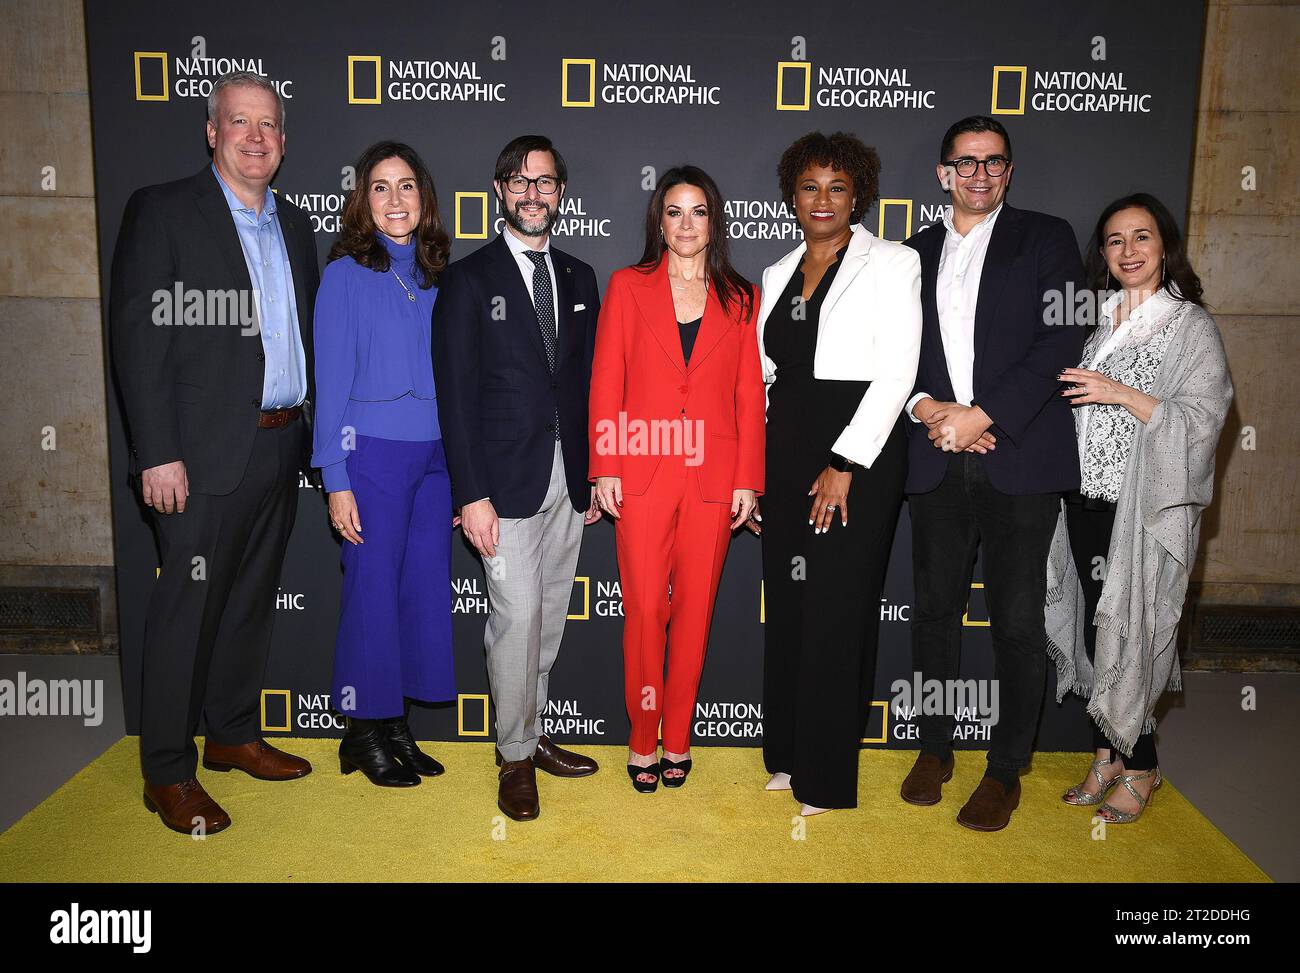 NEW YORK - OCTOBER 18: (L-R) David E. Miller, EVP & General Manager, National Geographic, Carolyn Bernstein, Executive Vice President, Global Scripted Content and Documentary Films at National Geographic, Nathan Lump, SVP, Editor in Chief, National Geographic, Courteney Monroe, President, National Geographic Content, Karen Greenfield, Senior Vice President of Content, Diversity and Inclusion, Tom McDonald, EVP Global Factual & Unscripted, National Geographic, and Pamela Levine, Head of Marketing attend the National Geographic Content Showcase at Hall des Lumieres on October 18, 2023 in New Yor Stock Photo